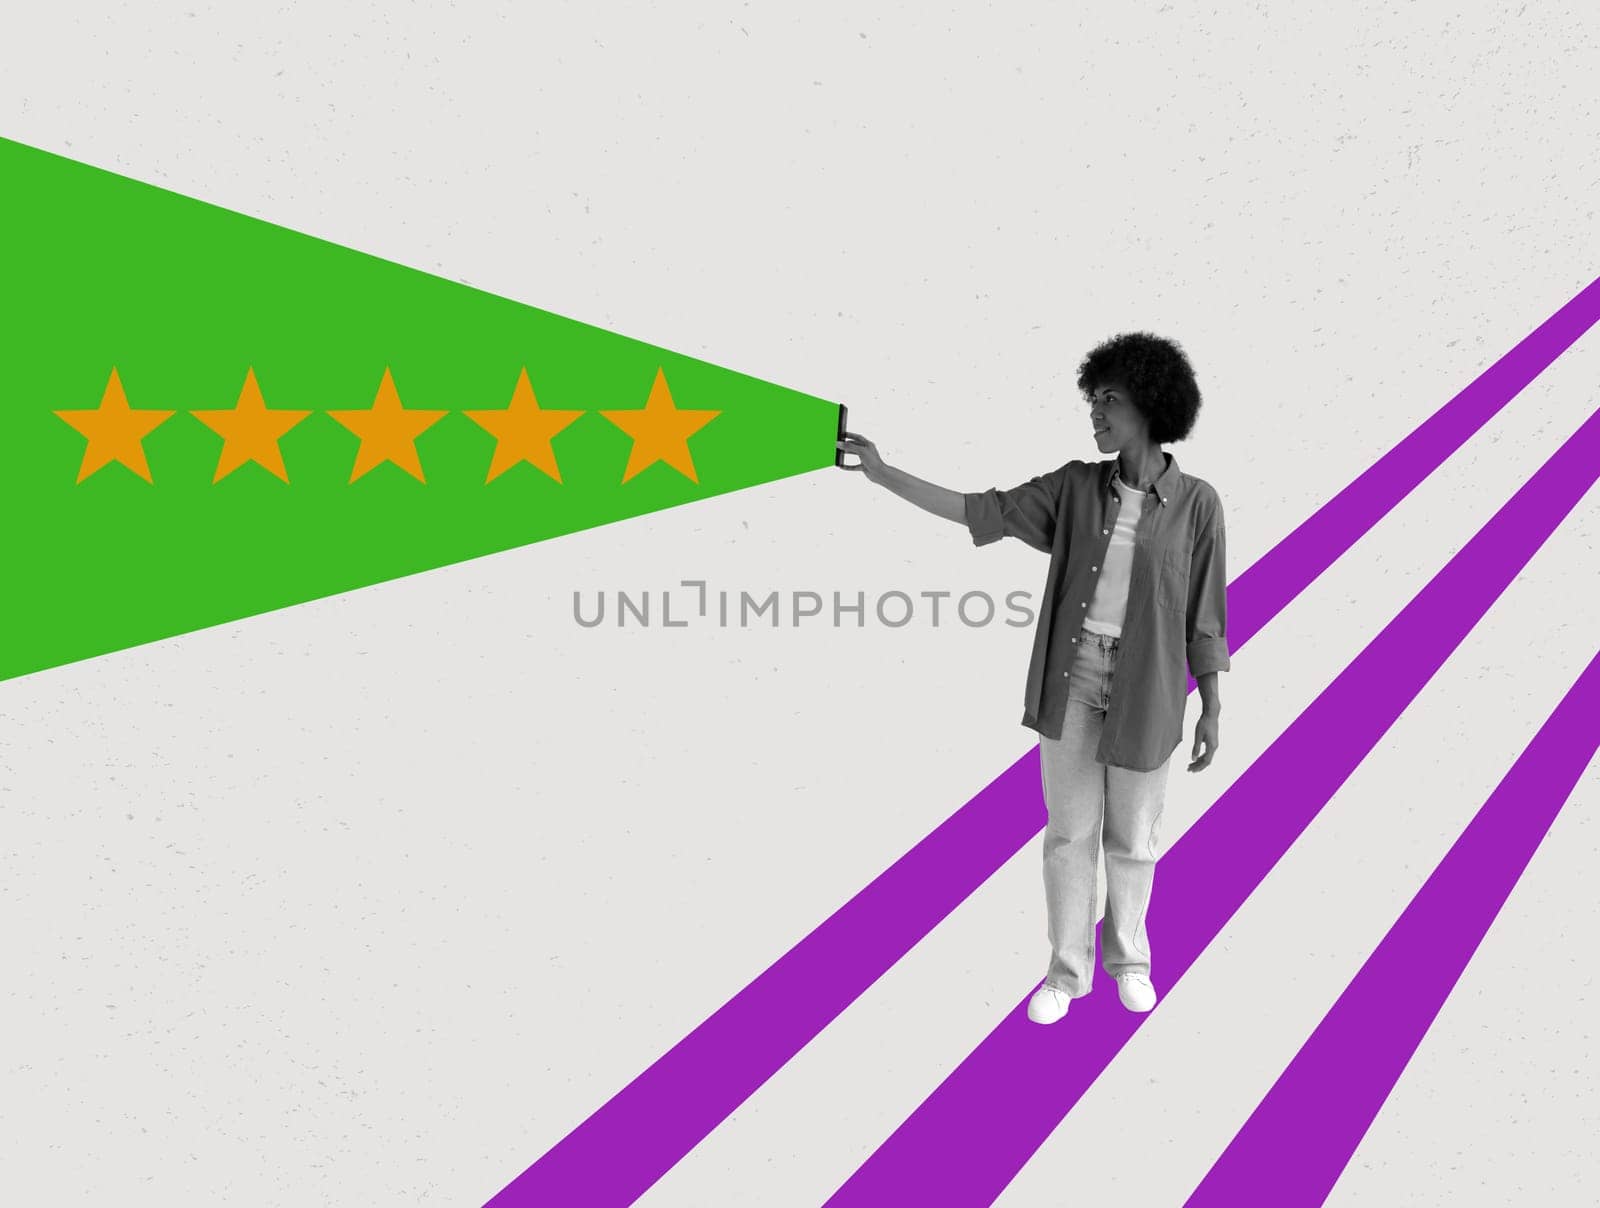 A collage where a girl is holding a phone and five stars as a symbol of customer rating.